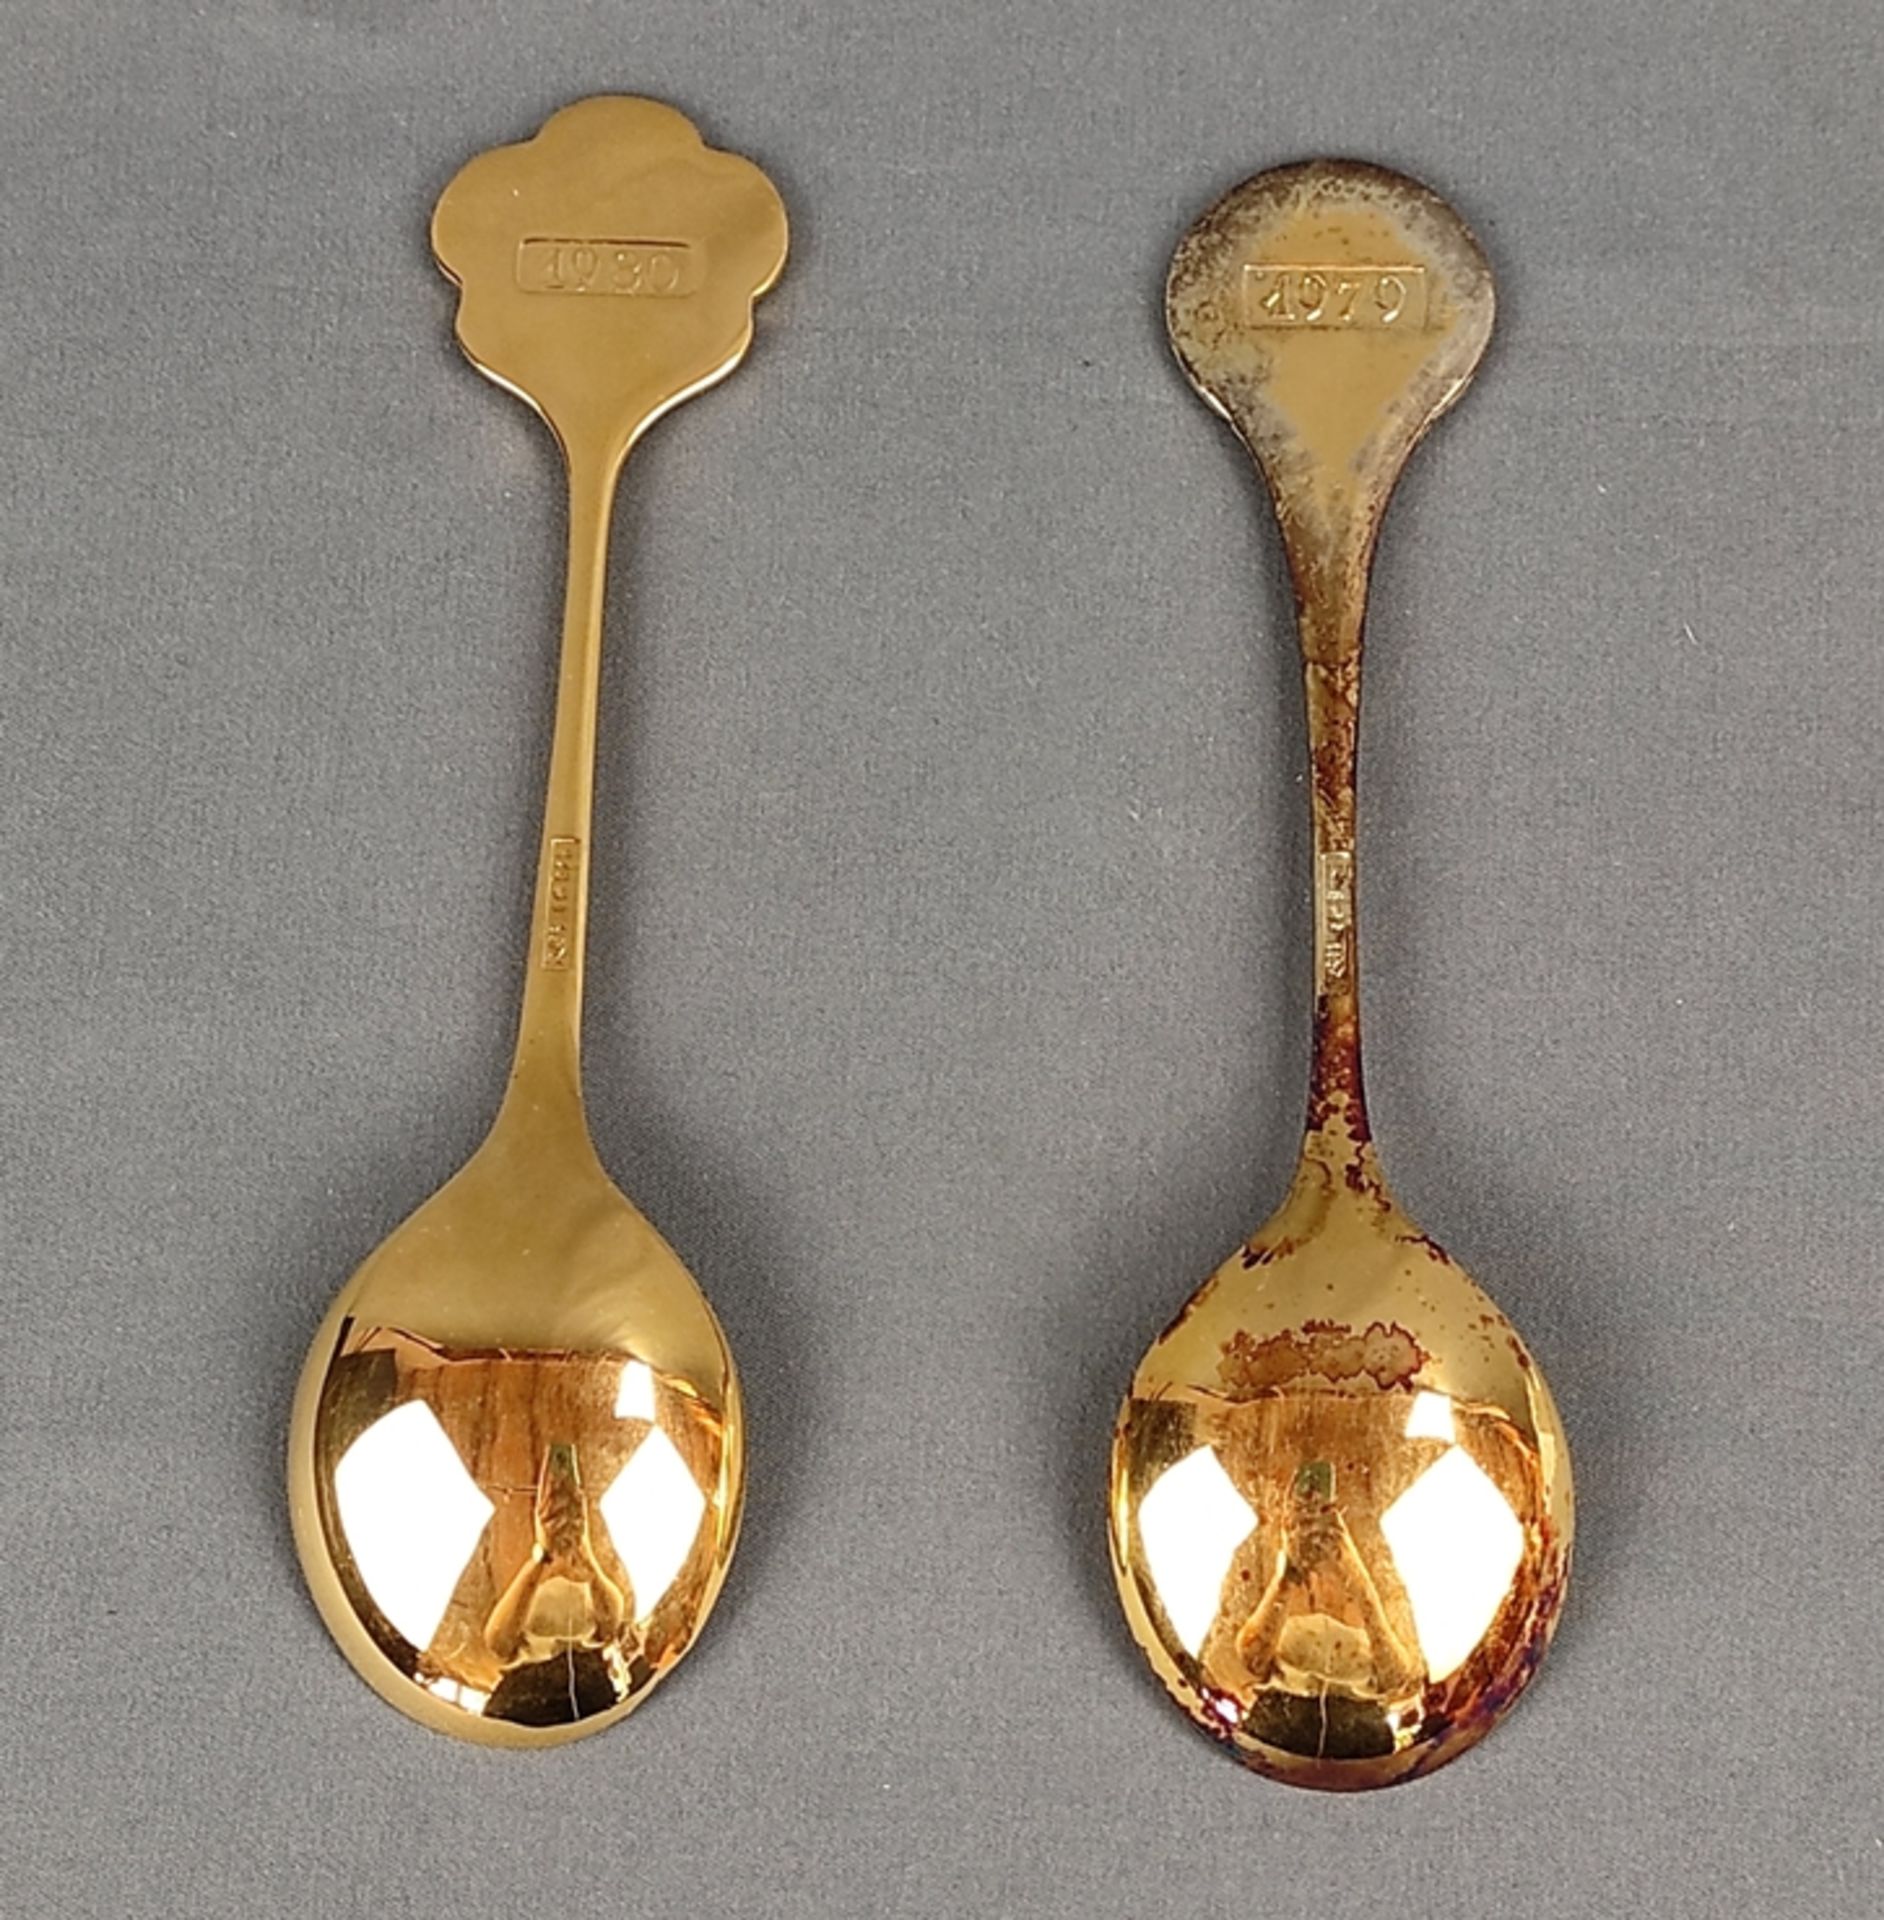 2 annual spoons, Robbe & Berking, sterling silver, relief worked and enamelled handle finishes, con - Image 2 of 5